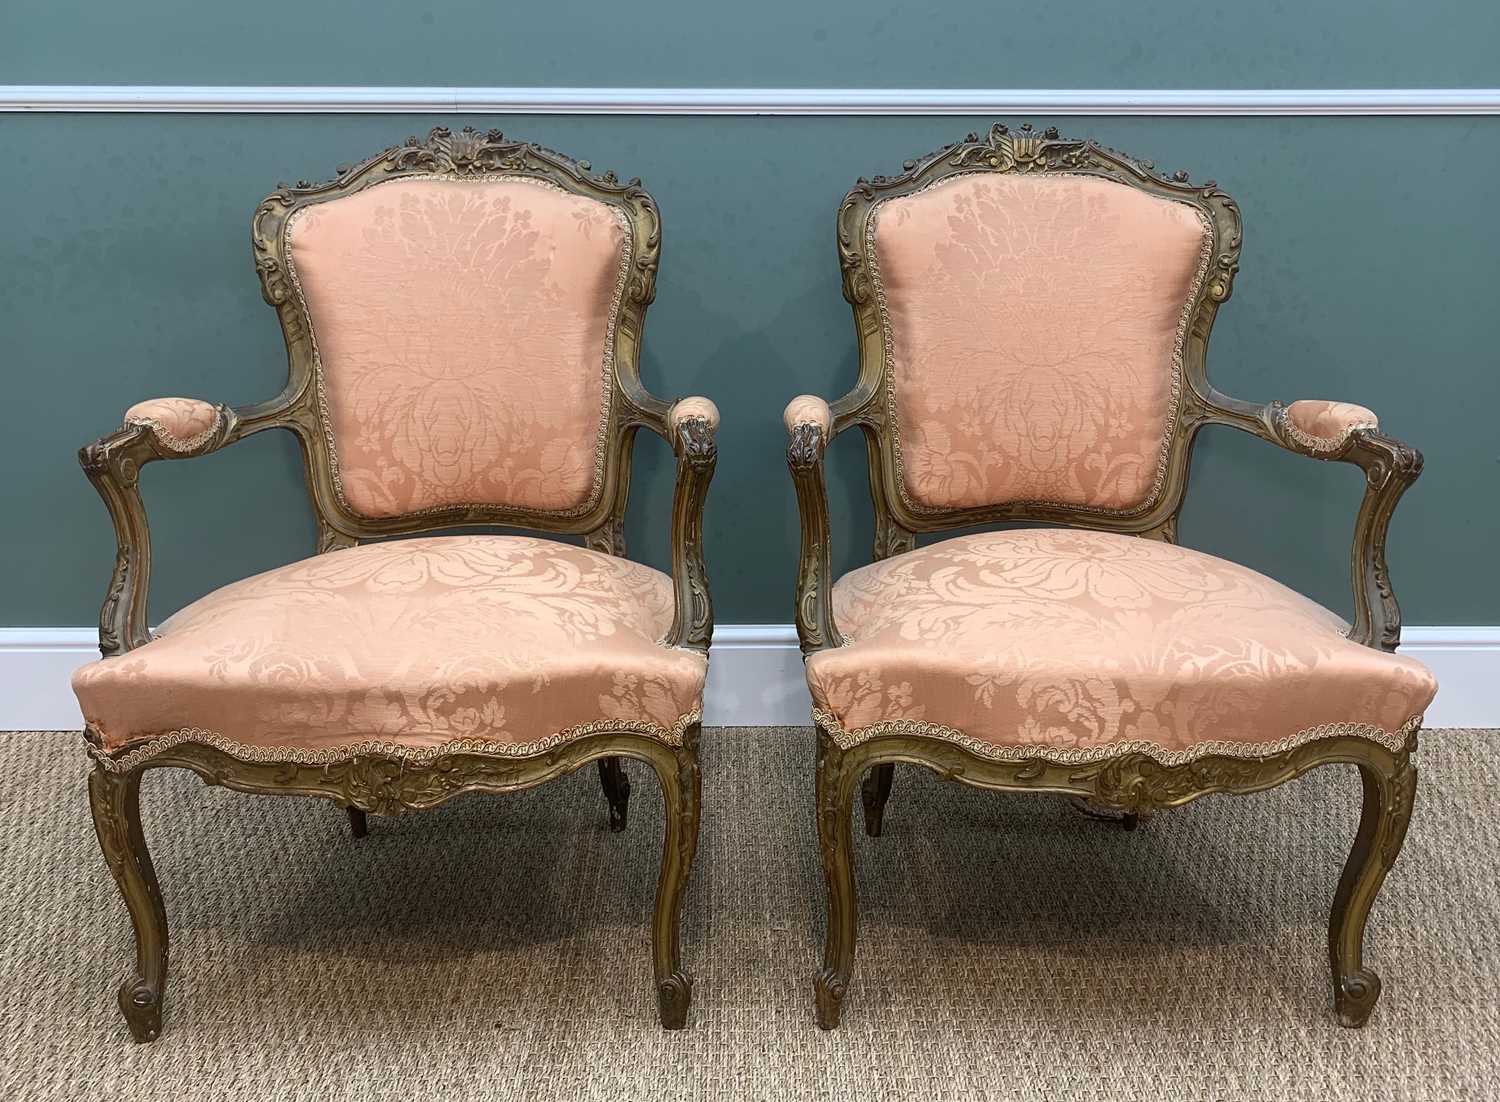 LOUIS XV-STYLE GILTWOOD SALON SUITE, comprising canape and pair of fauteuils, apricot damask - Image 5 of 7